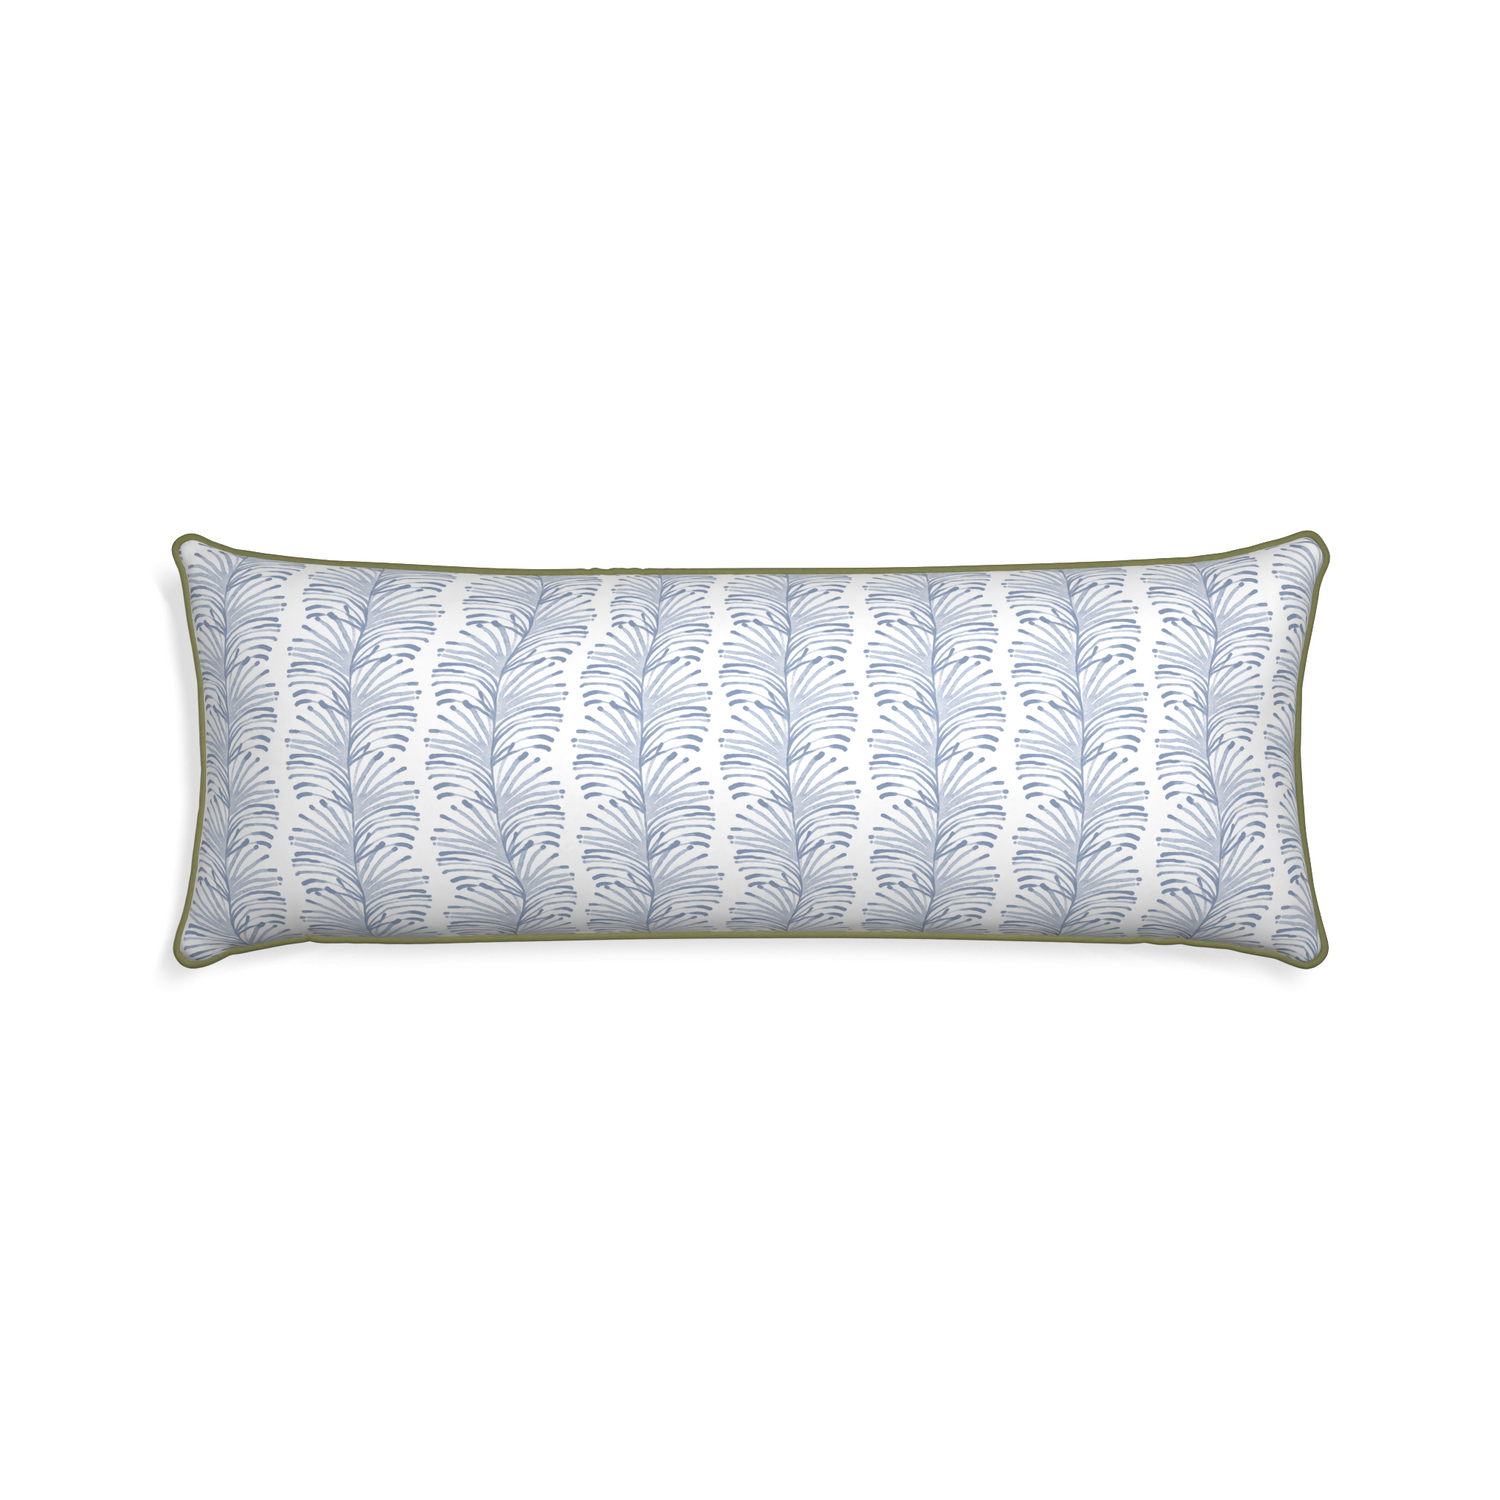 Xl-lumbar emma sky custom pillow with moss piping on white background